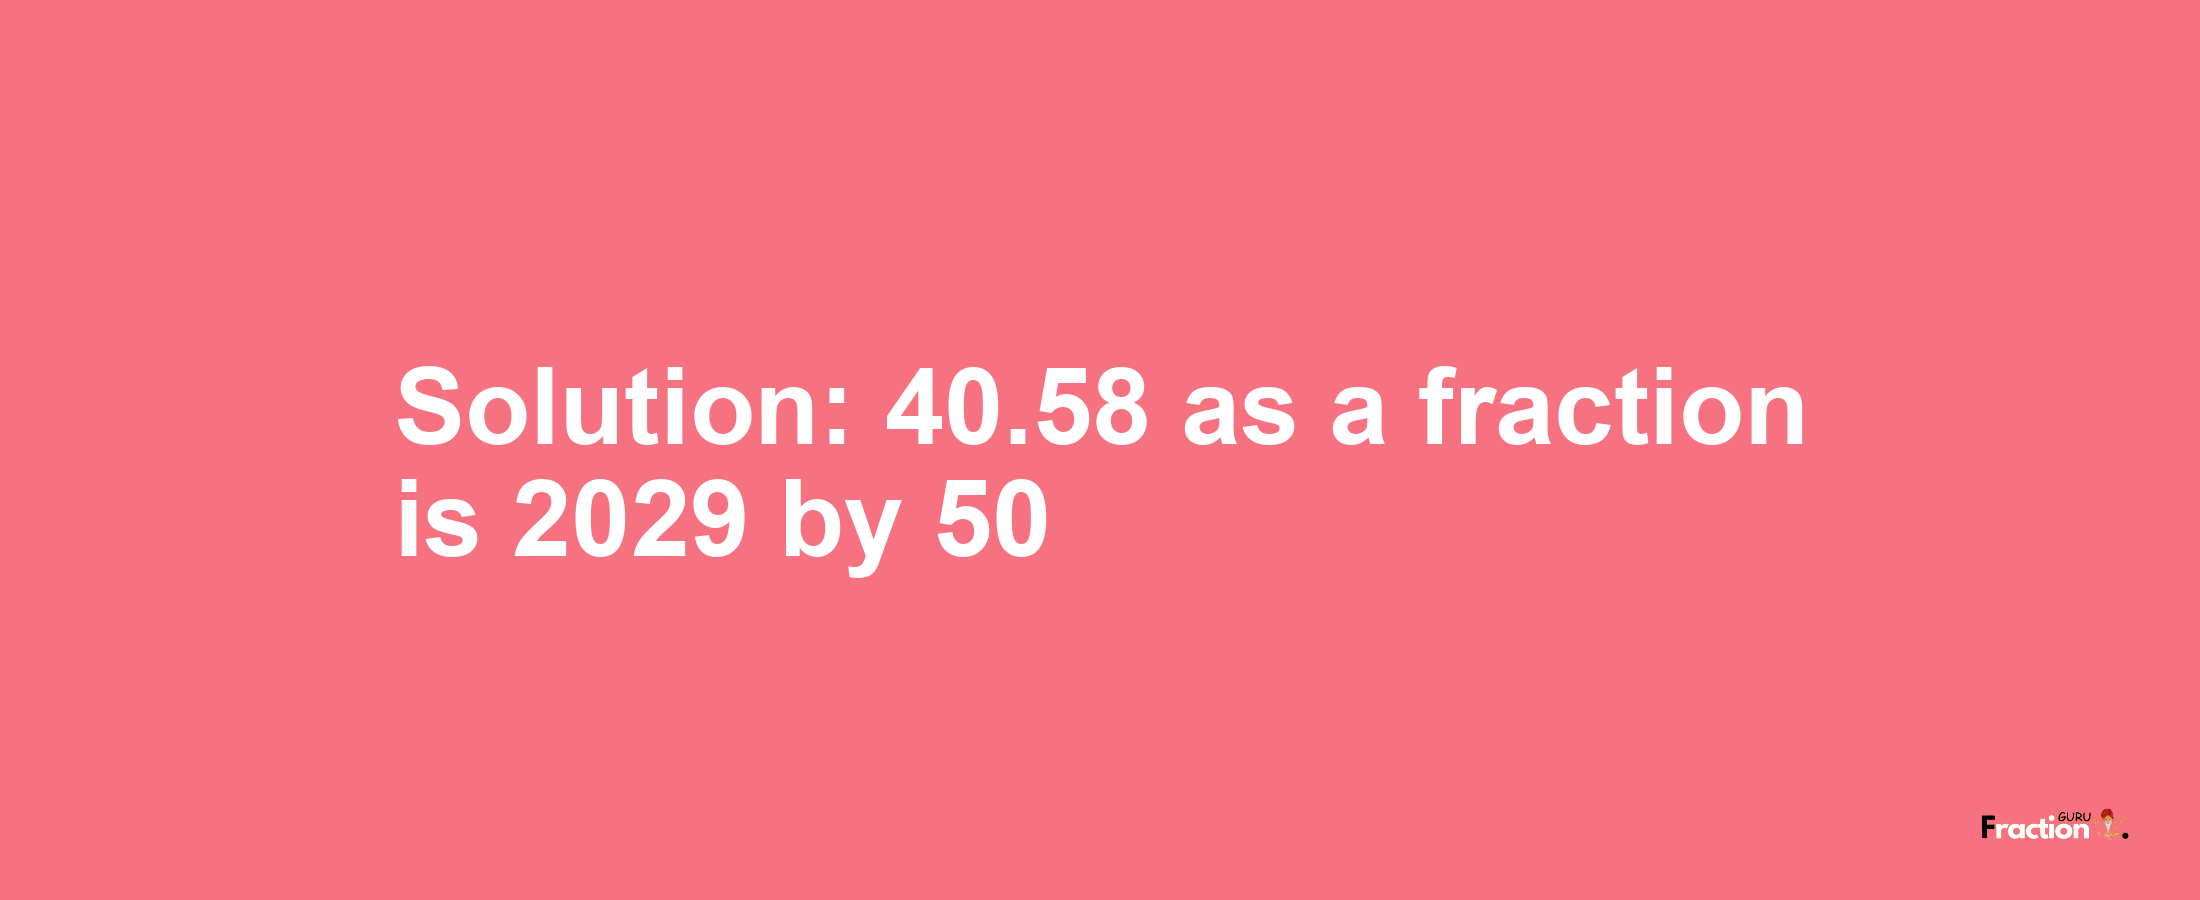 Solution:40.58 as a fraction is 2029/50